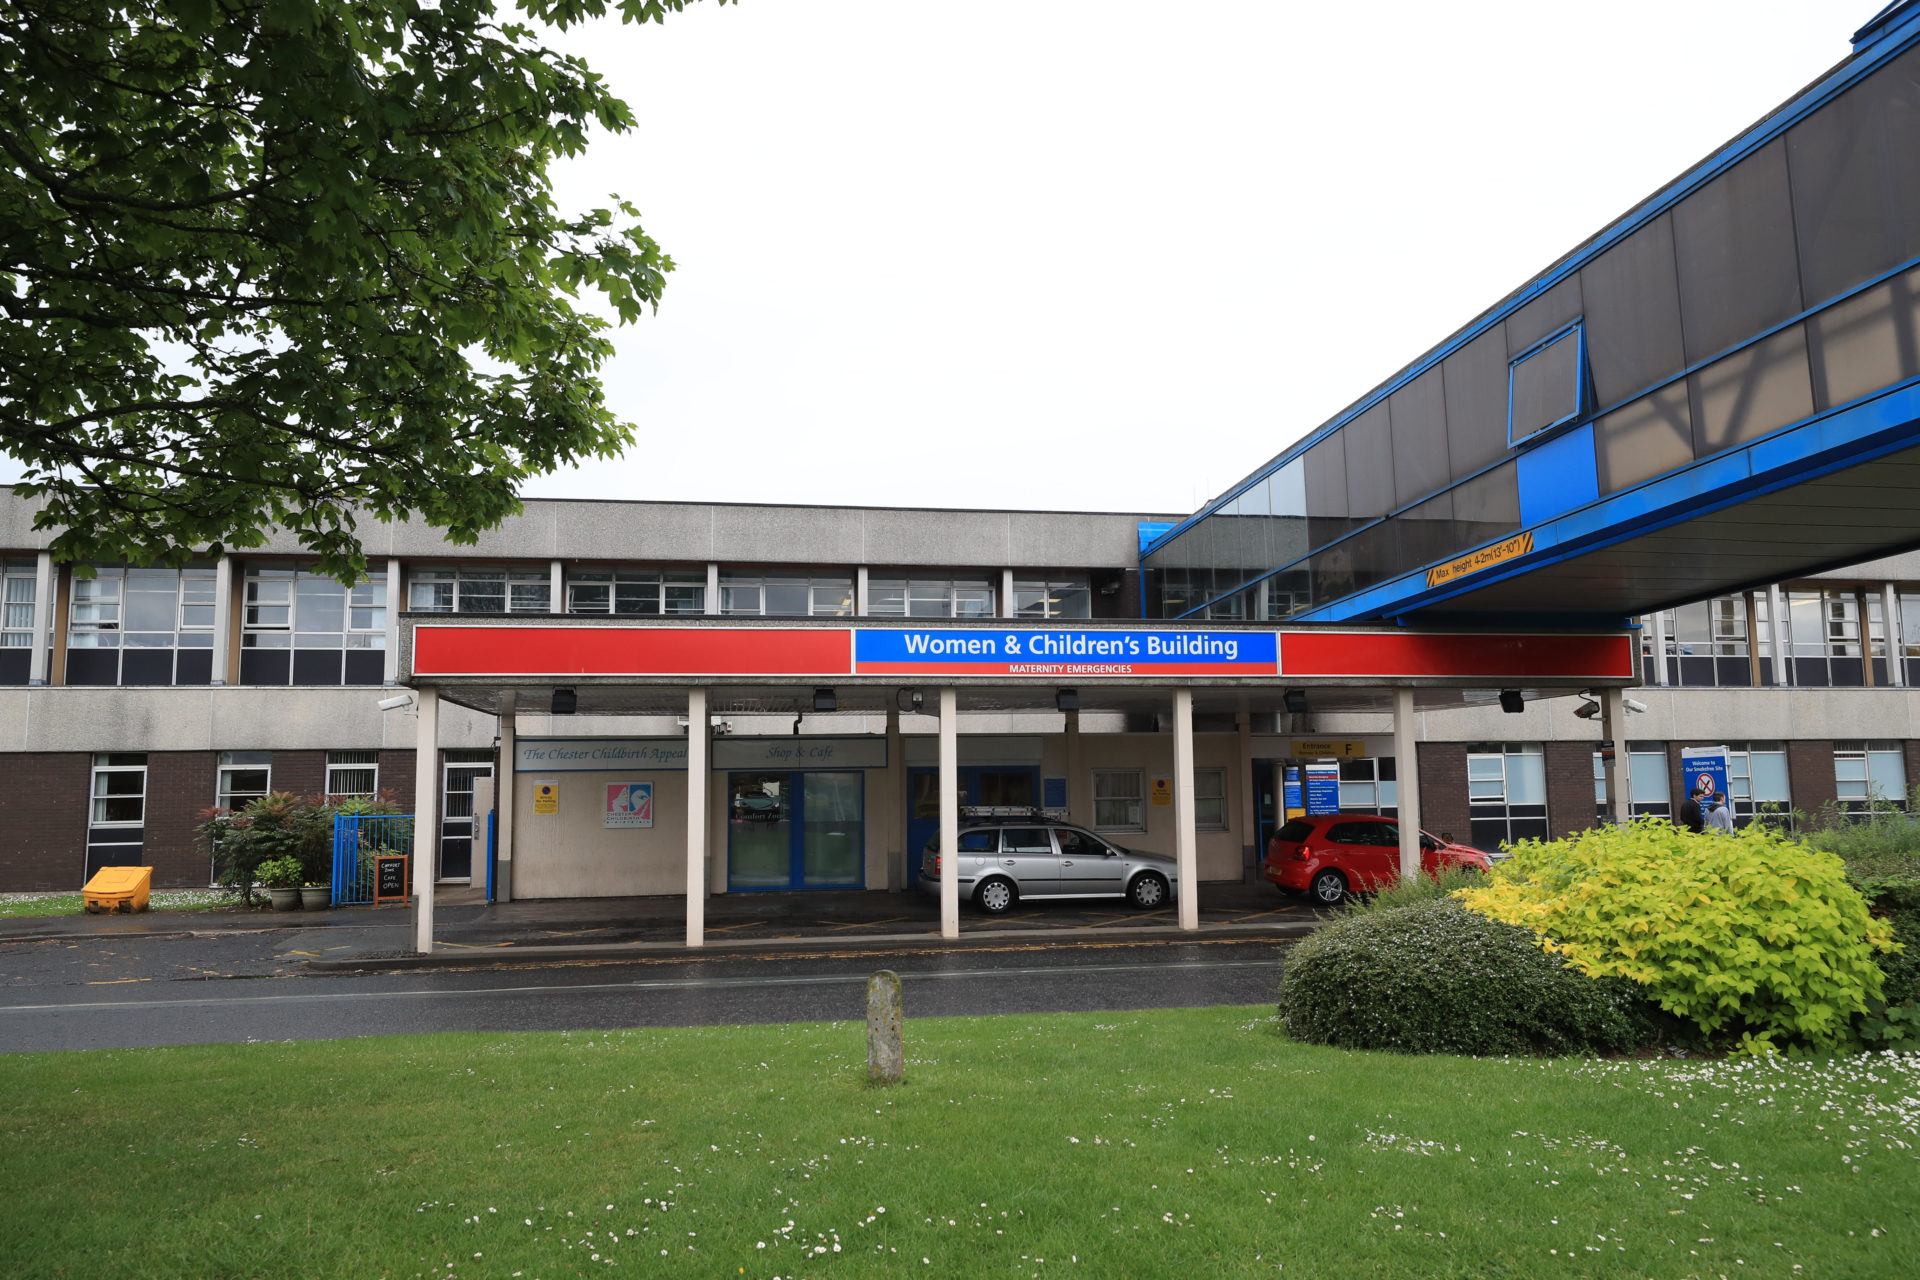 The Countess of Chester Hospital in Chester, England is seen in May 2017.